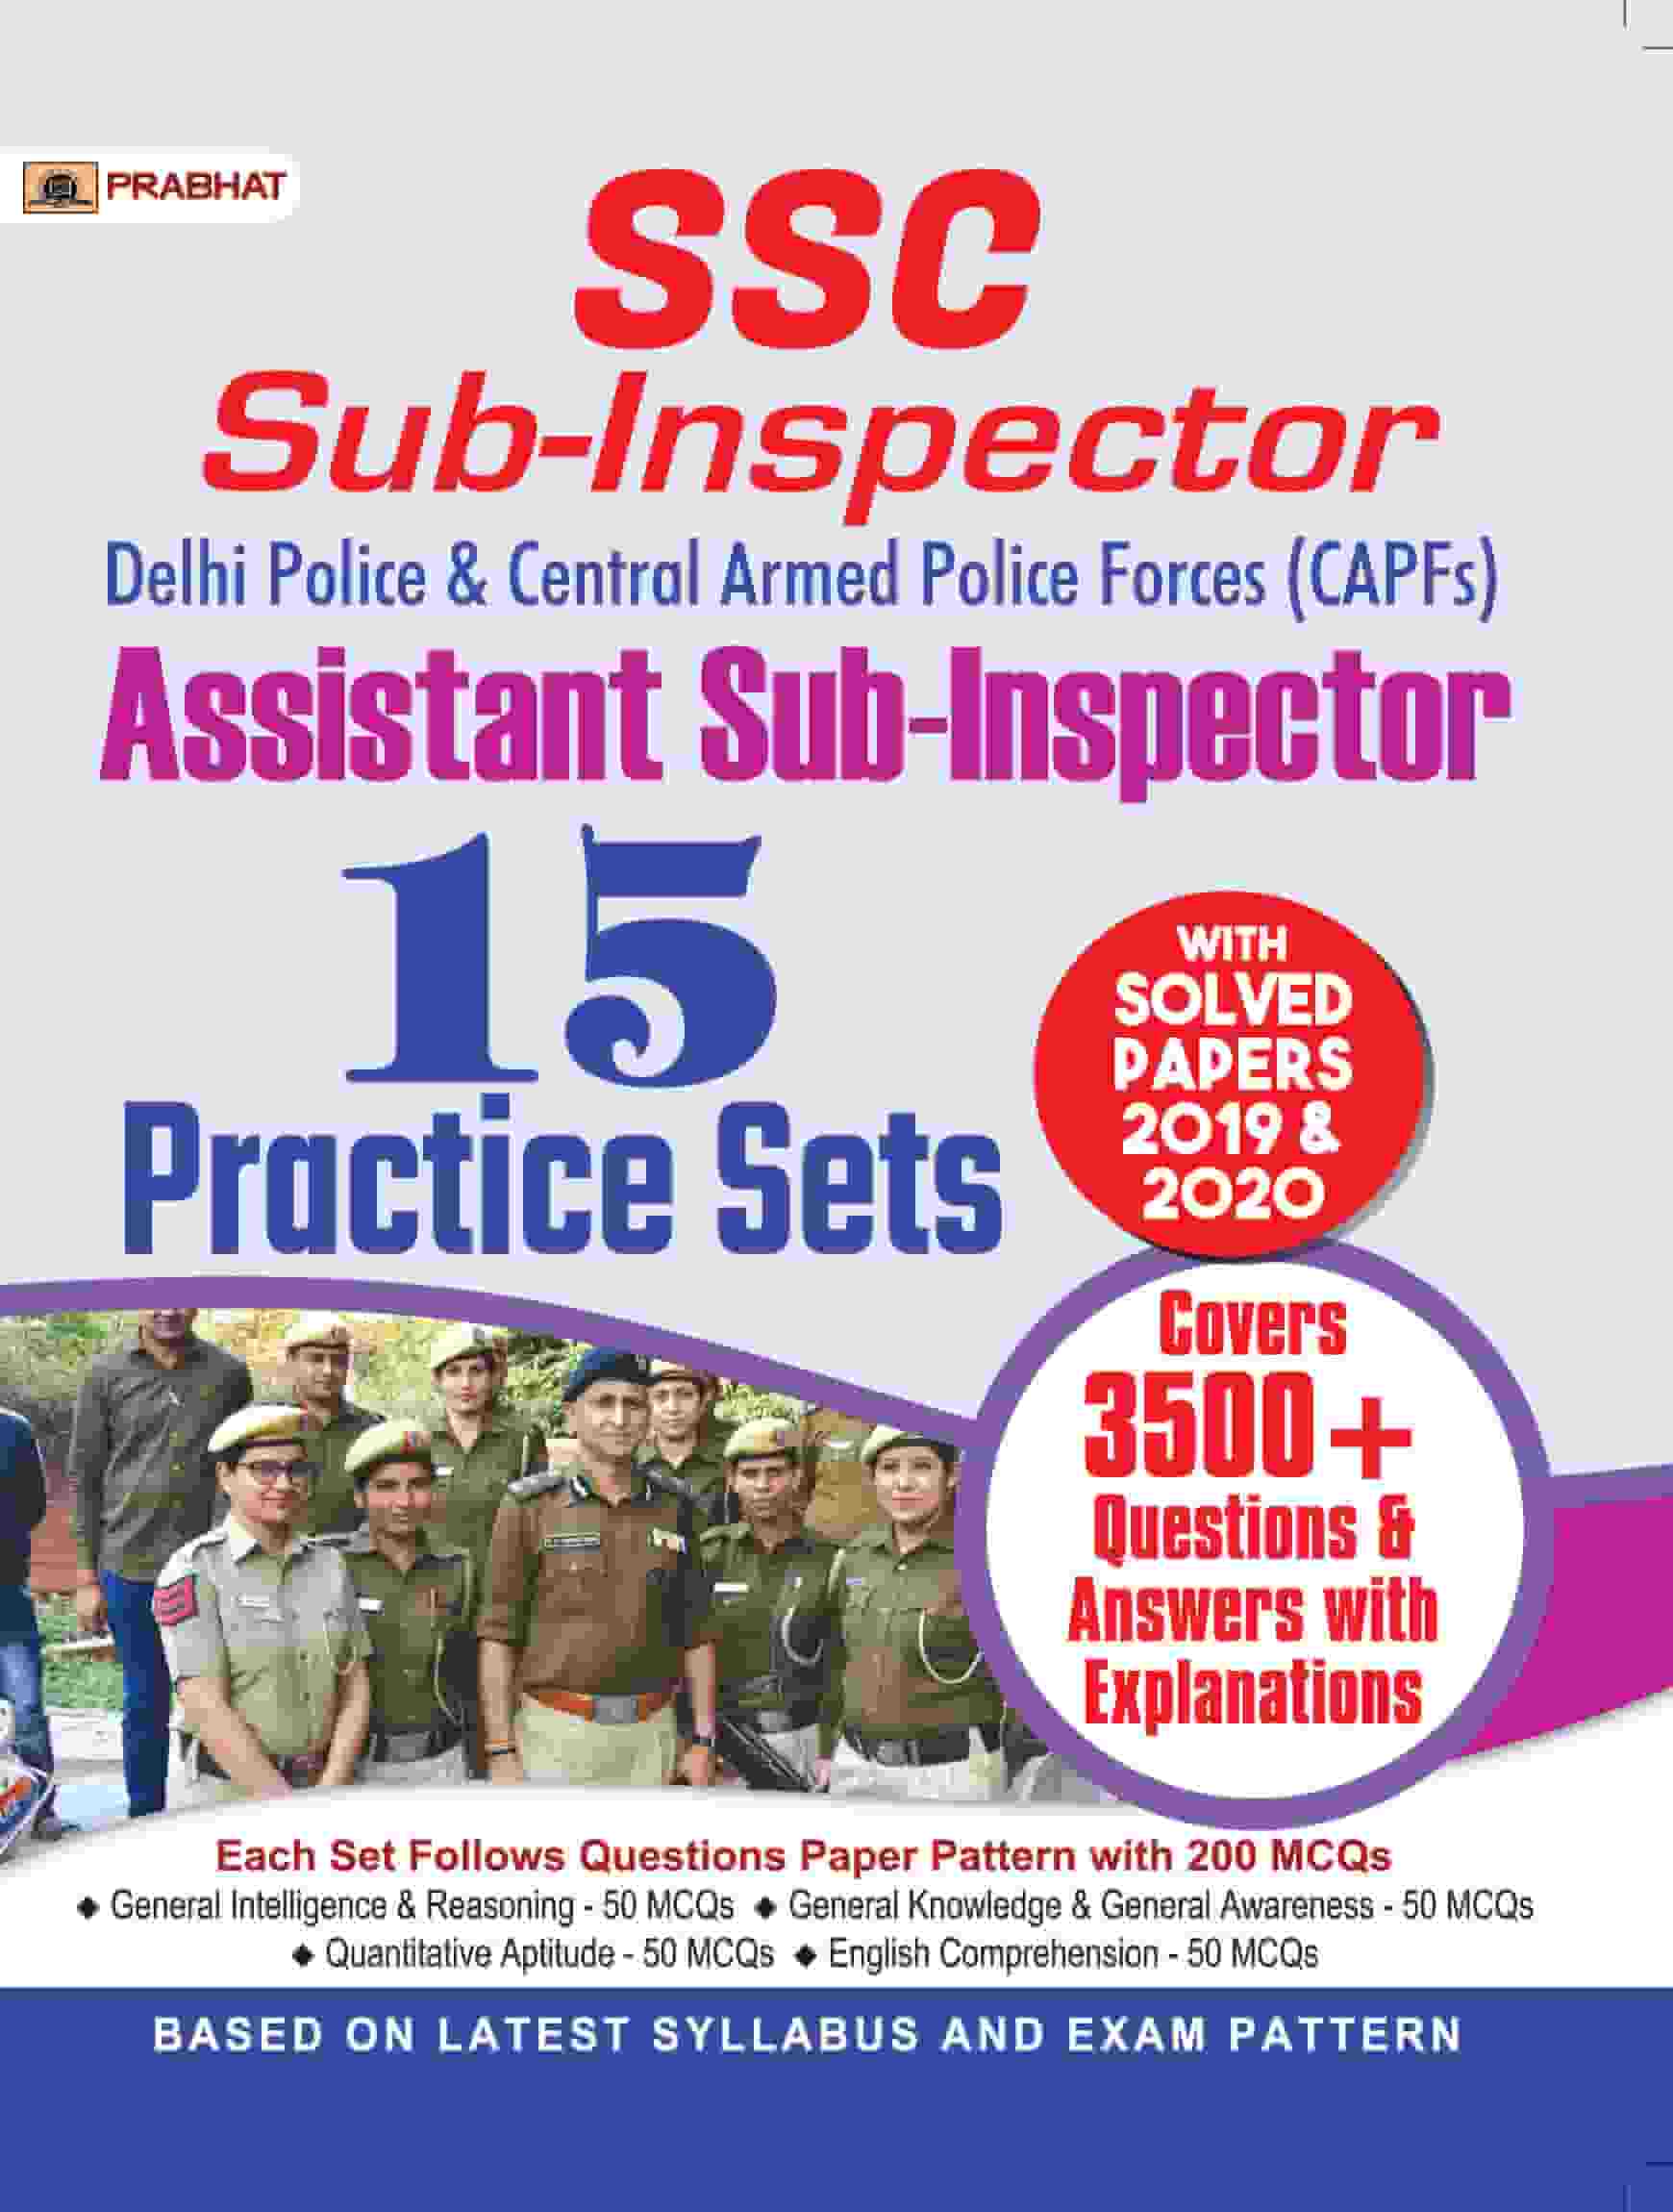 SSC Sub-Inspector & Assistant Sub-Inspector 15 Practice Sets